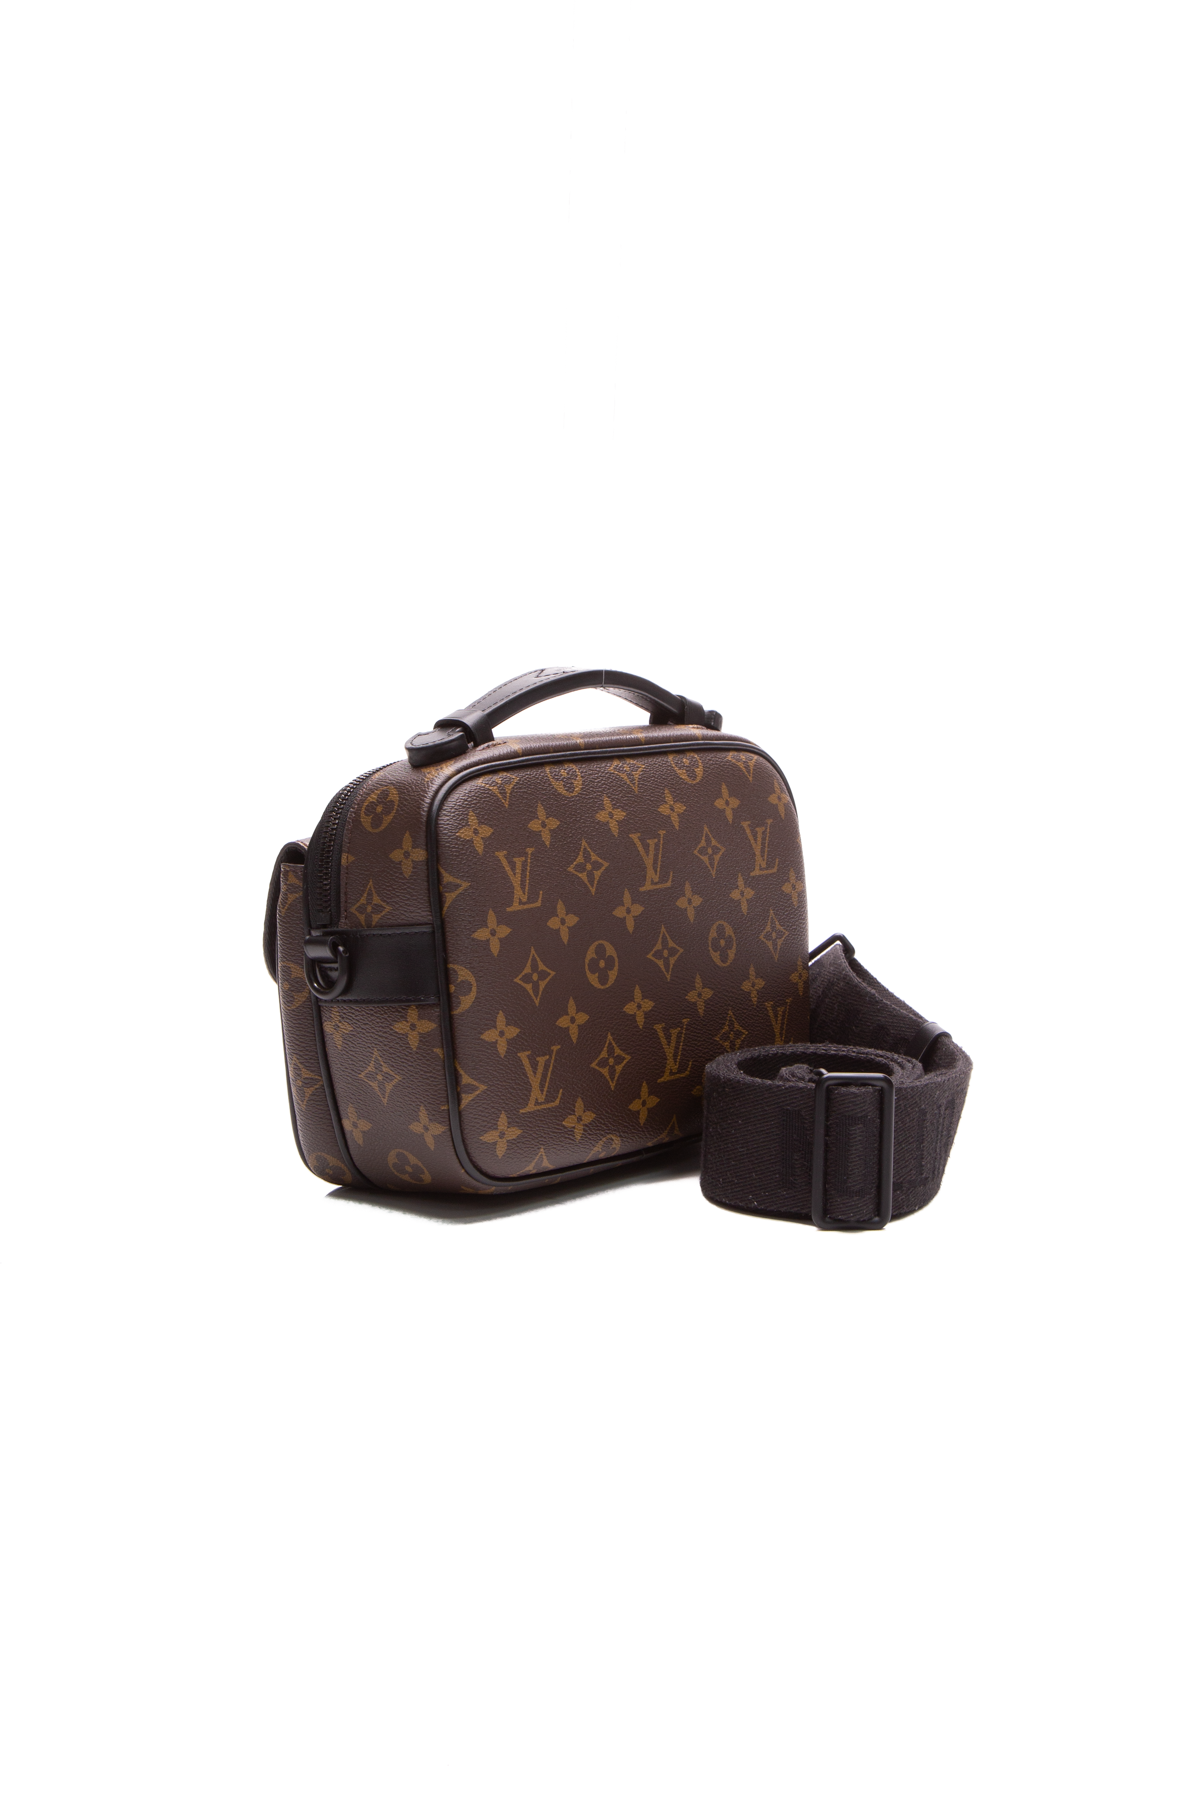 Louis Vuitton Takeoff Sling, Brown, One Size